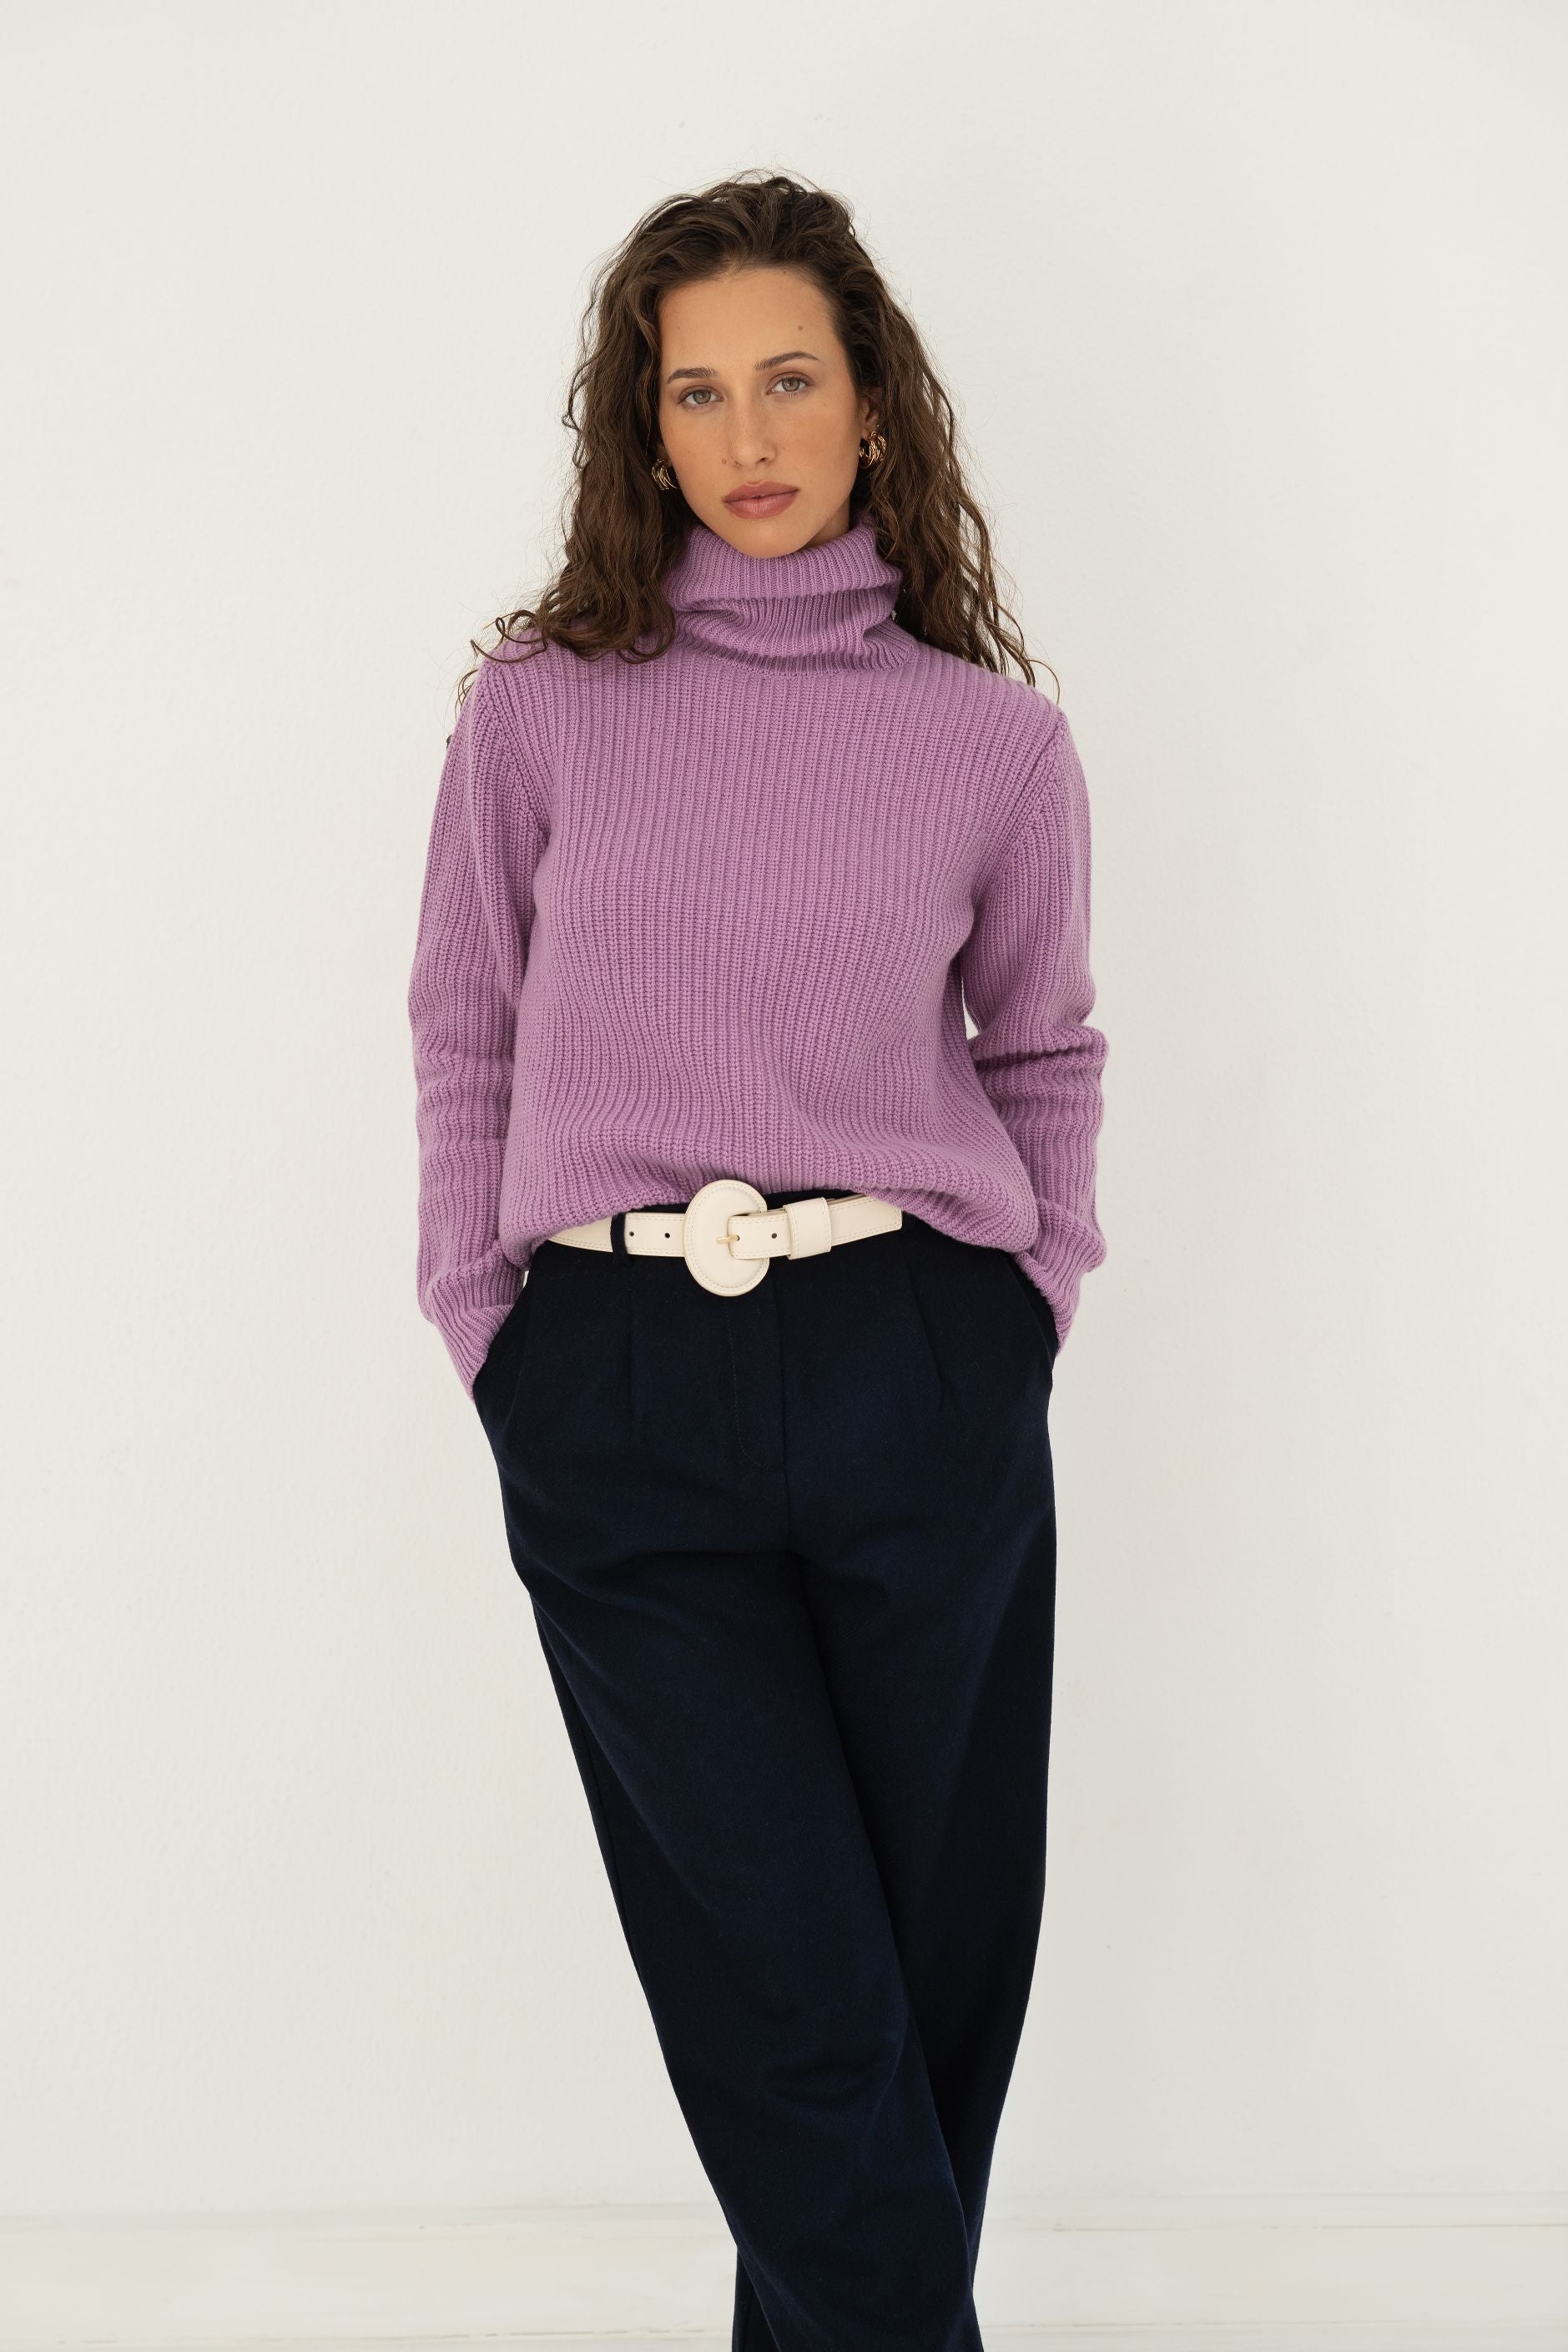  Naz women's wool turtleneck for winter warmth made from recycled fibers in lilac. 